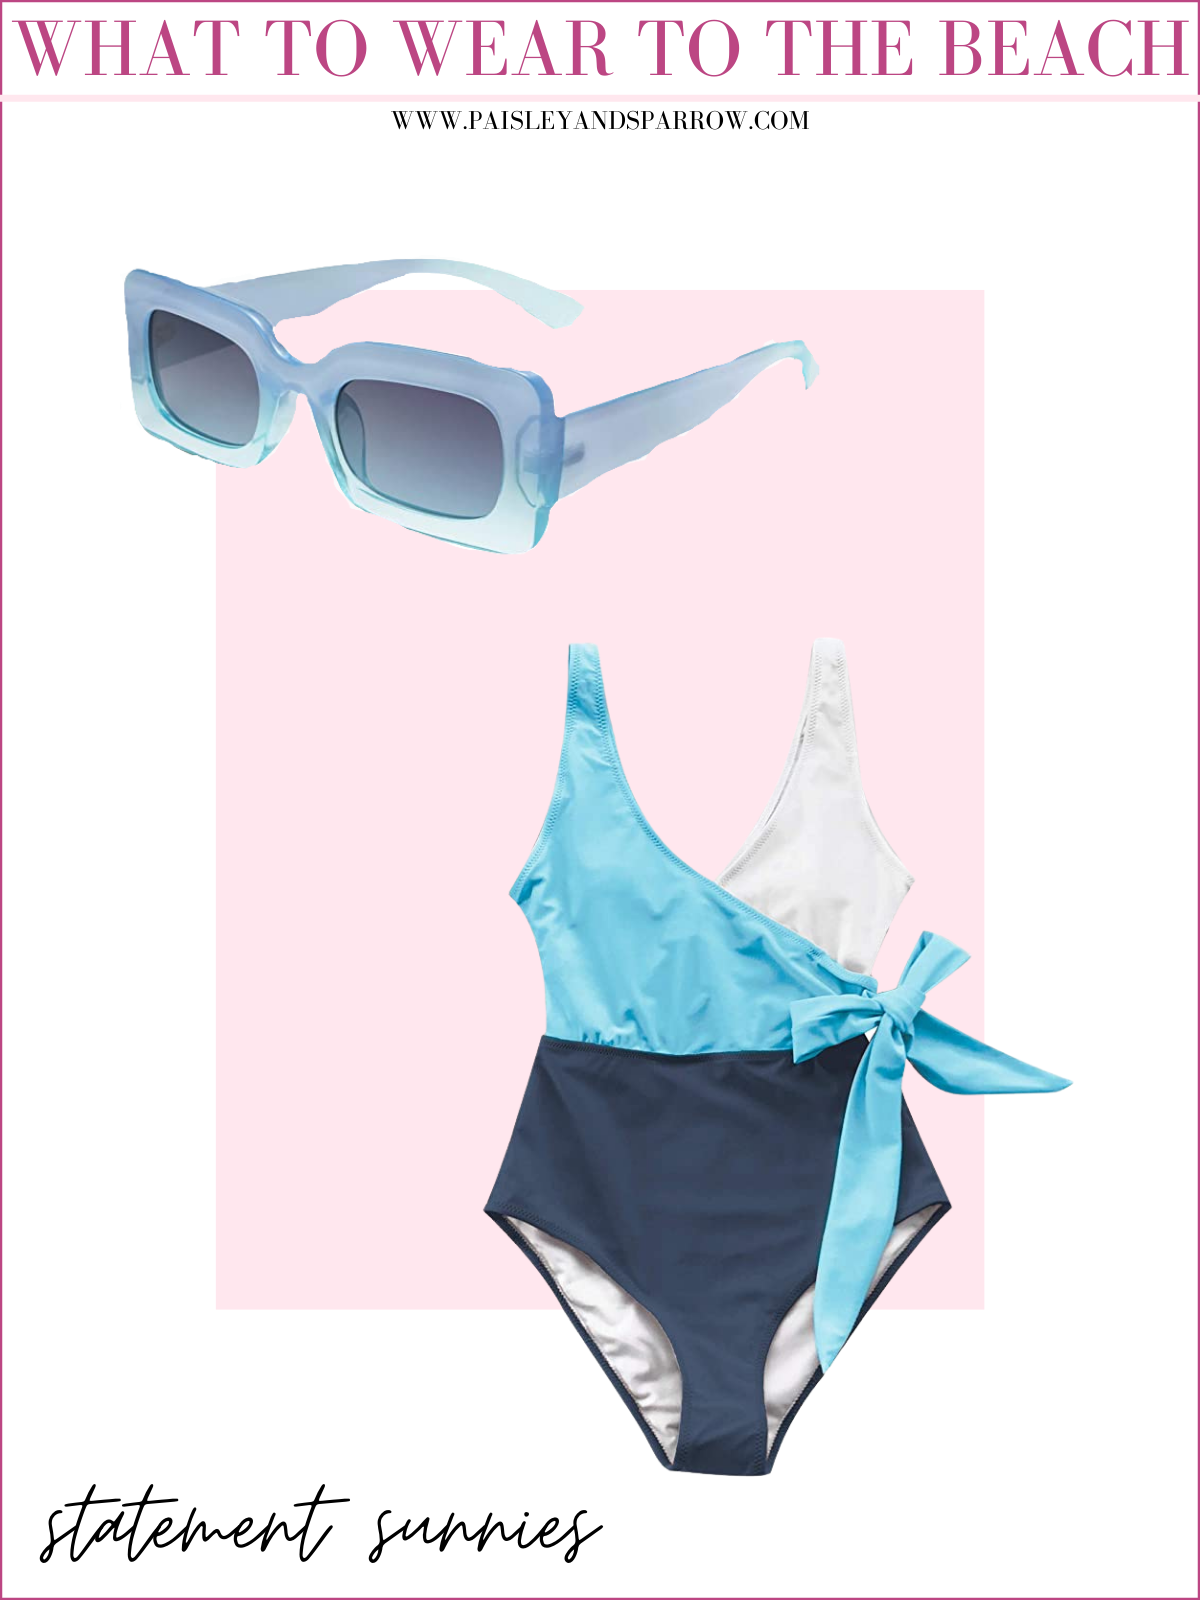 what to wear to the beach - statement sunnies and blue and white swimsuit